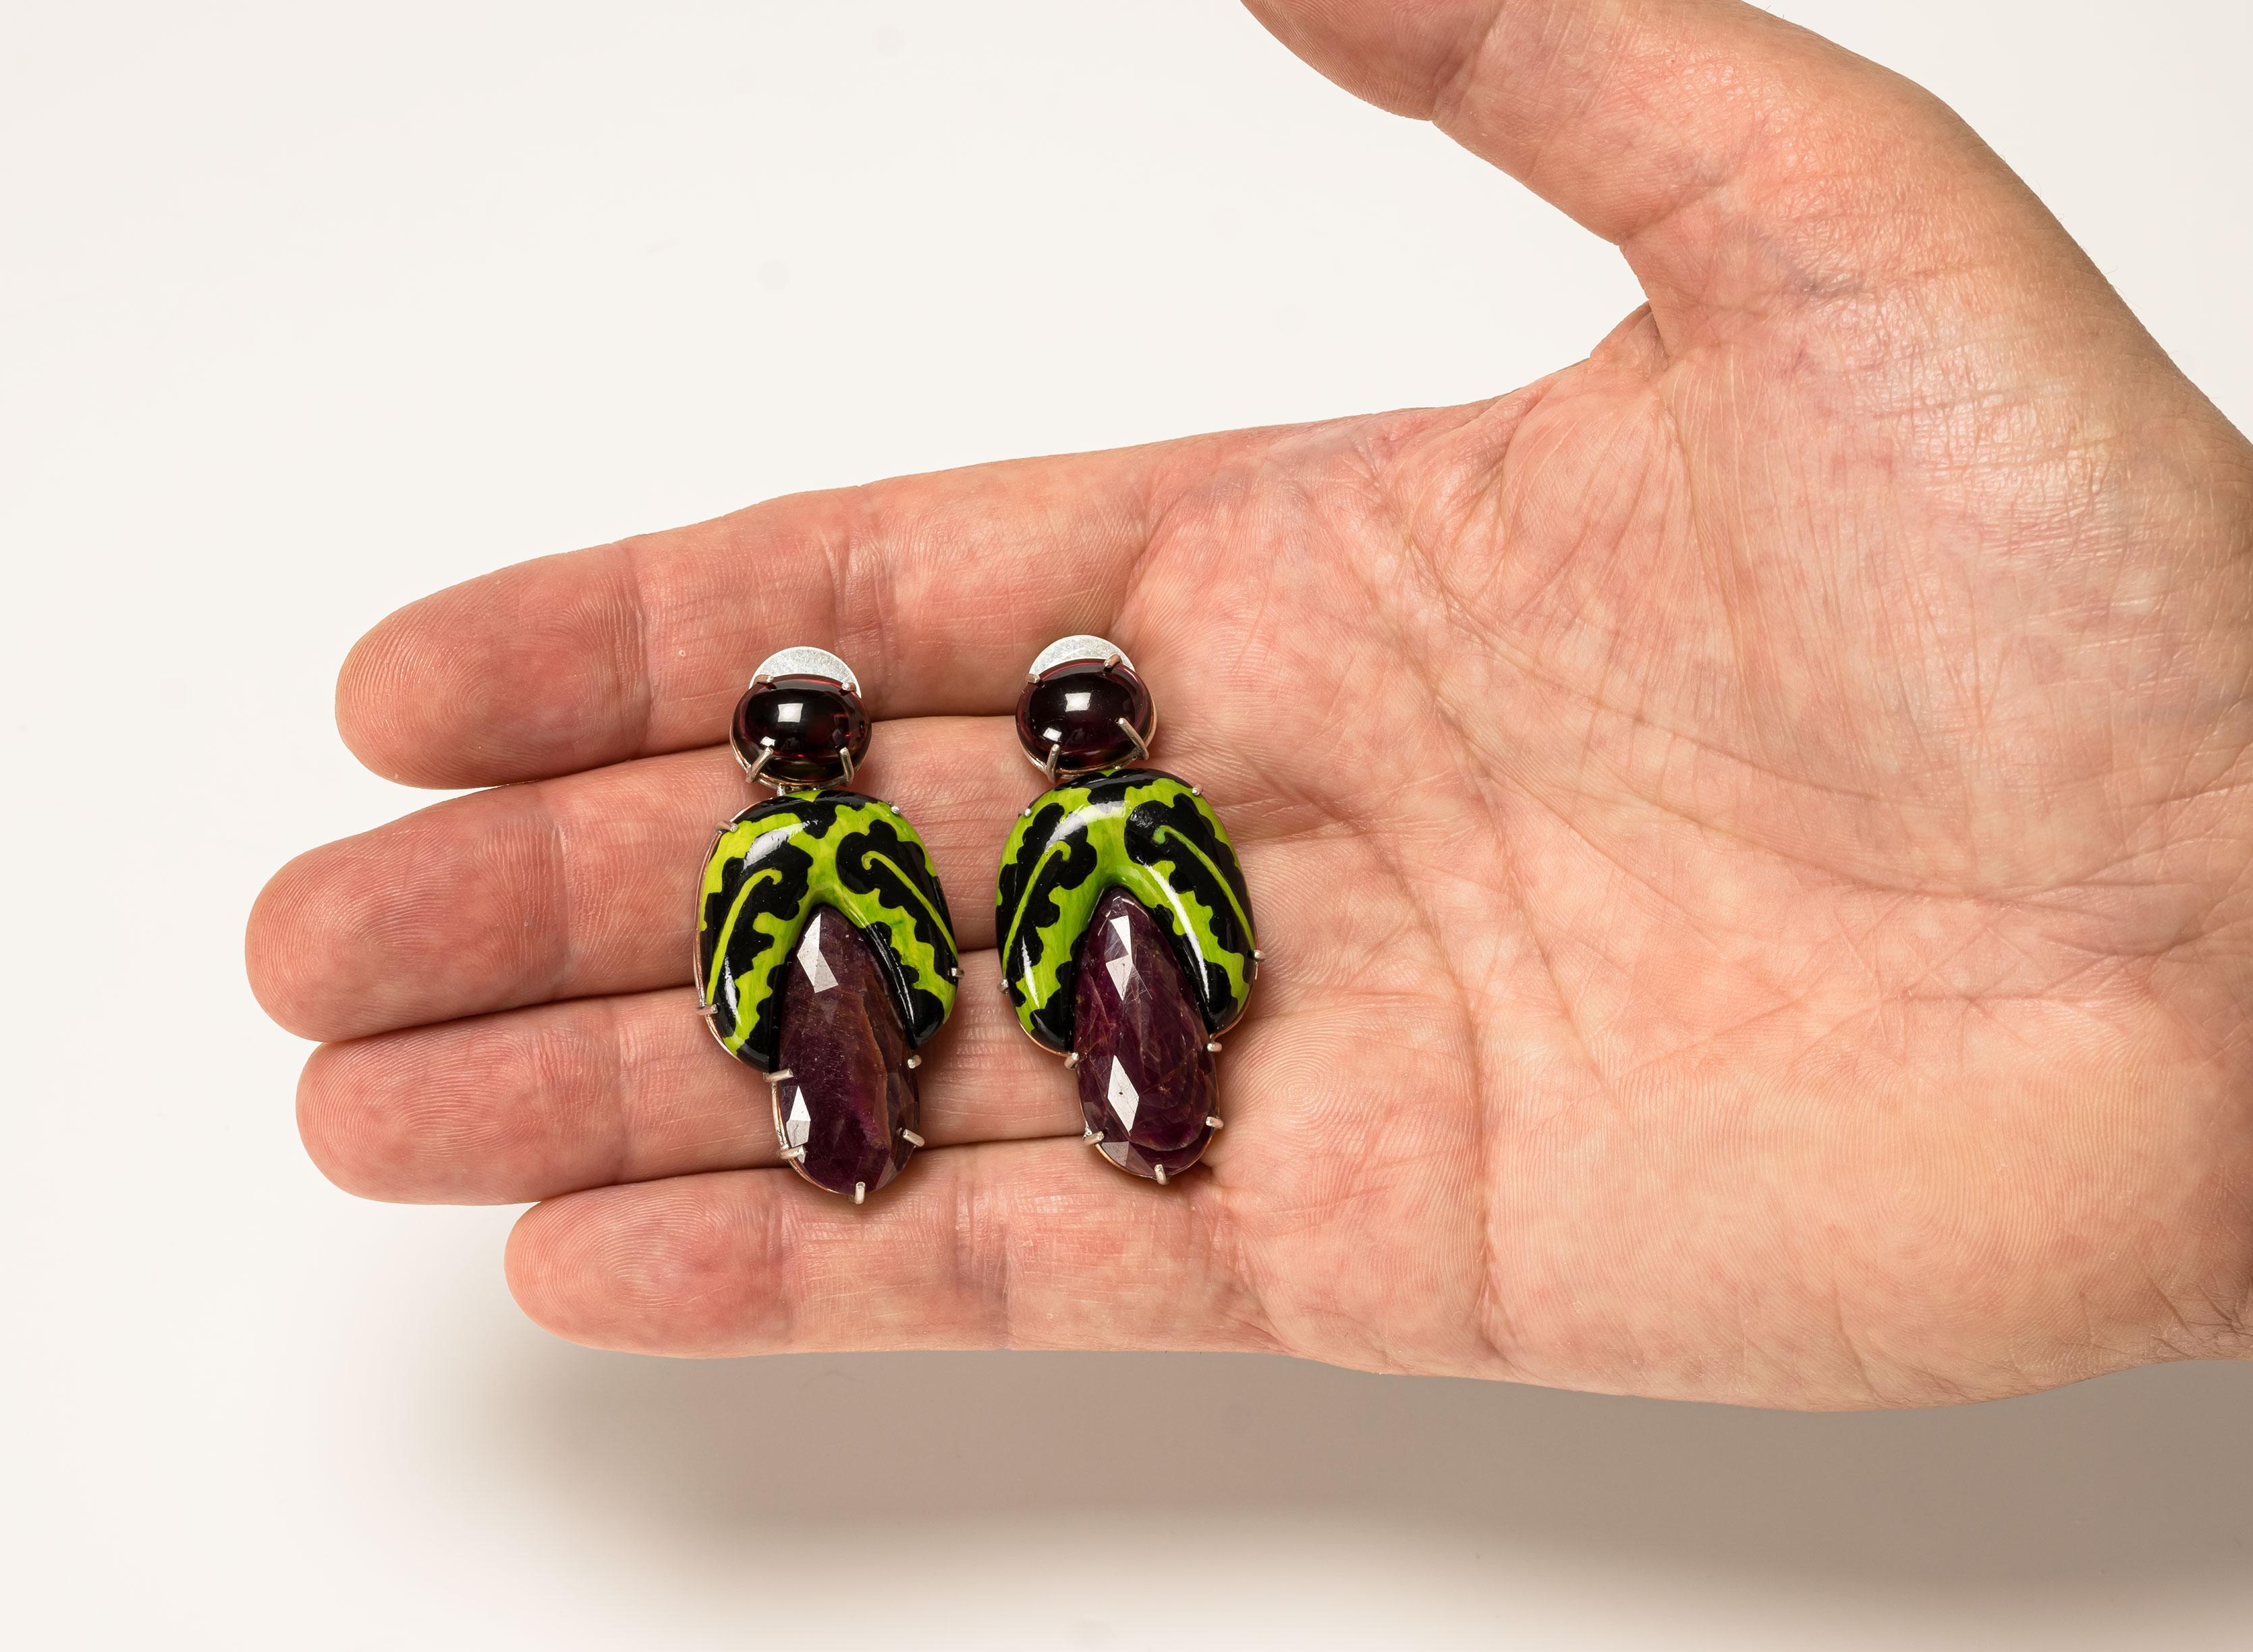 Stud Earrings “Plettro”, 2023, are a one-of-a-kind contemporary author jewelry by italian artist Gian Luca Bartellone.
Materials: papier-mâché, gold 18kt, silver, corundum, garnets.

The main body is made of papier-mâché and hand painted with green